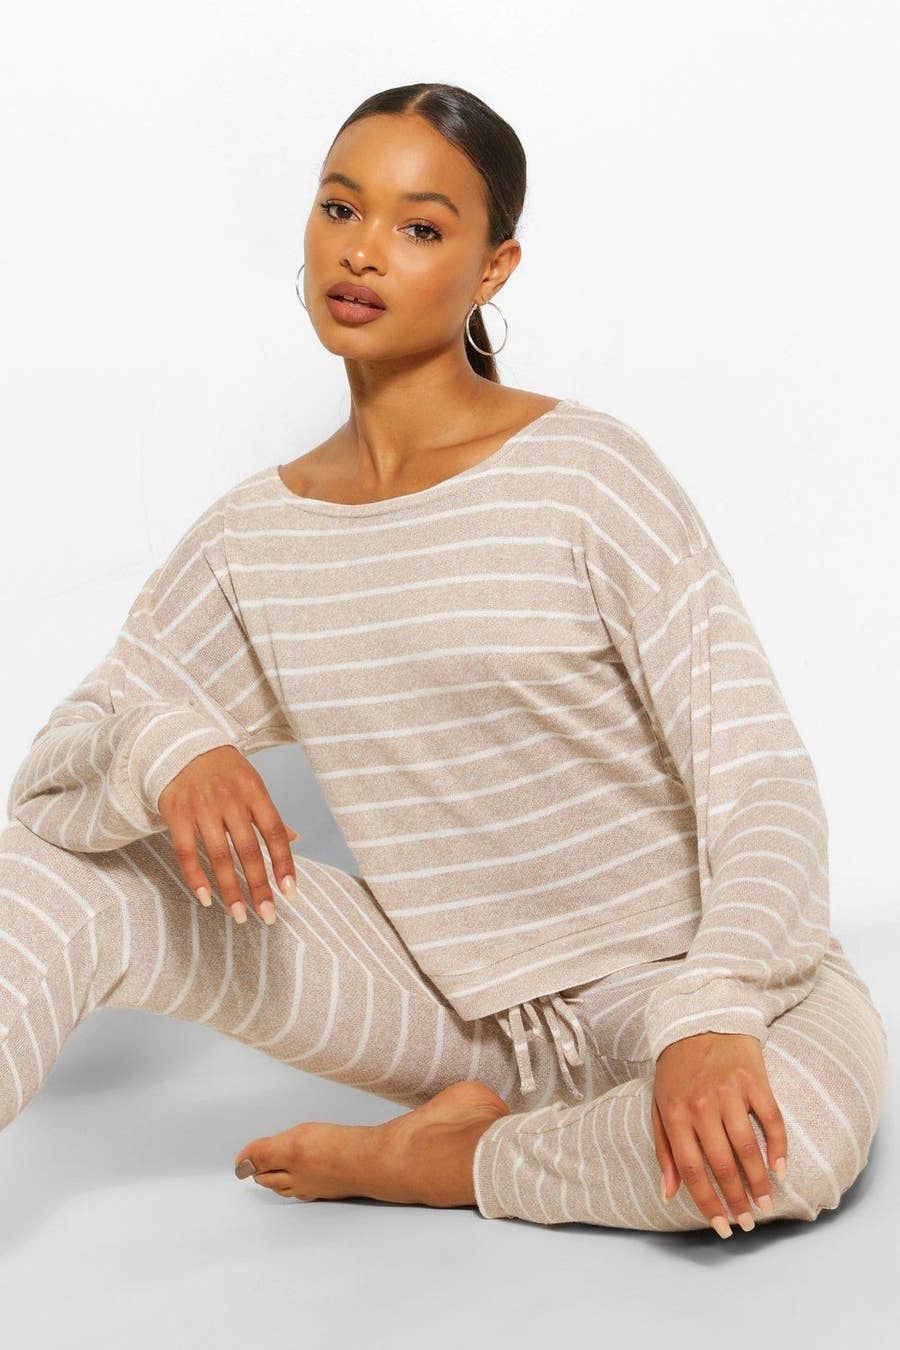 Oprah and I Are Fans of This Cozy Spanx Loungewear Set, Now in New Colors